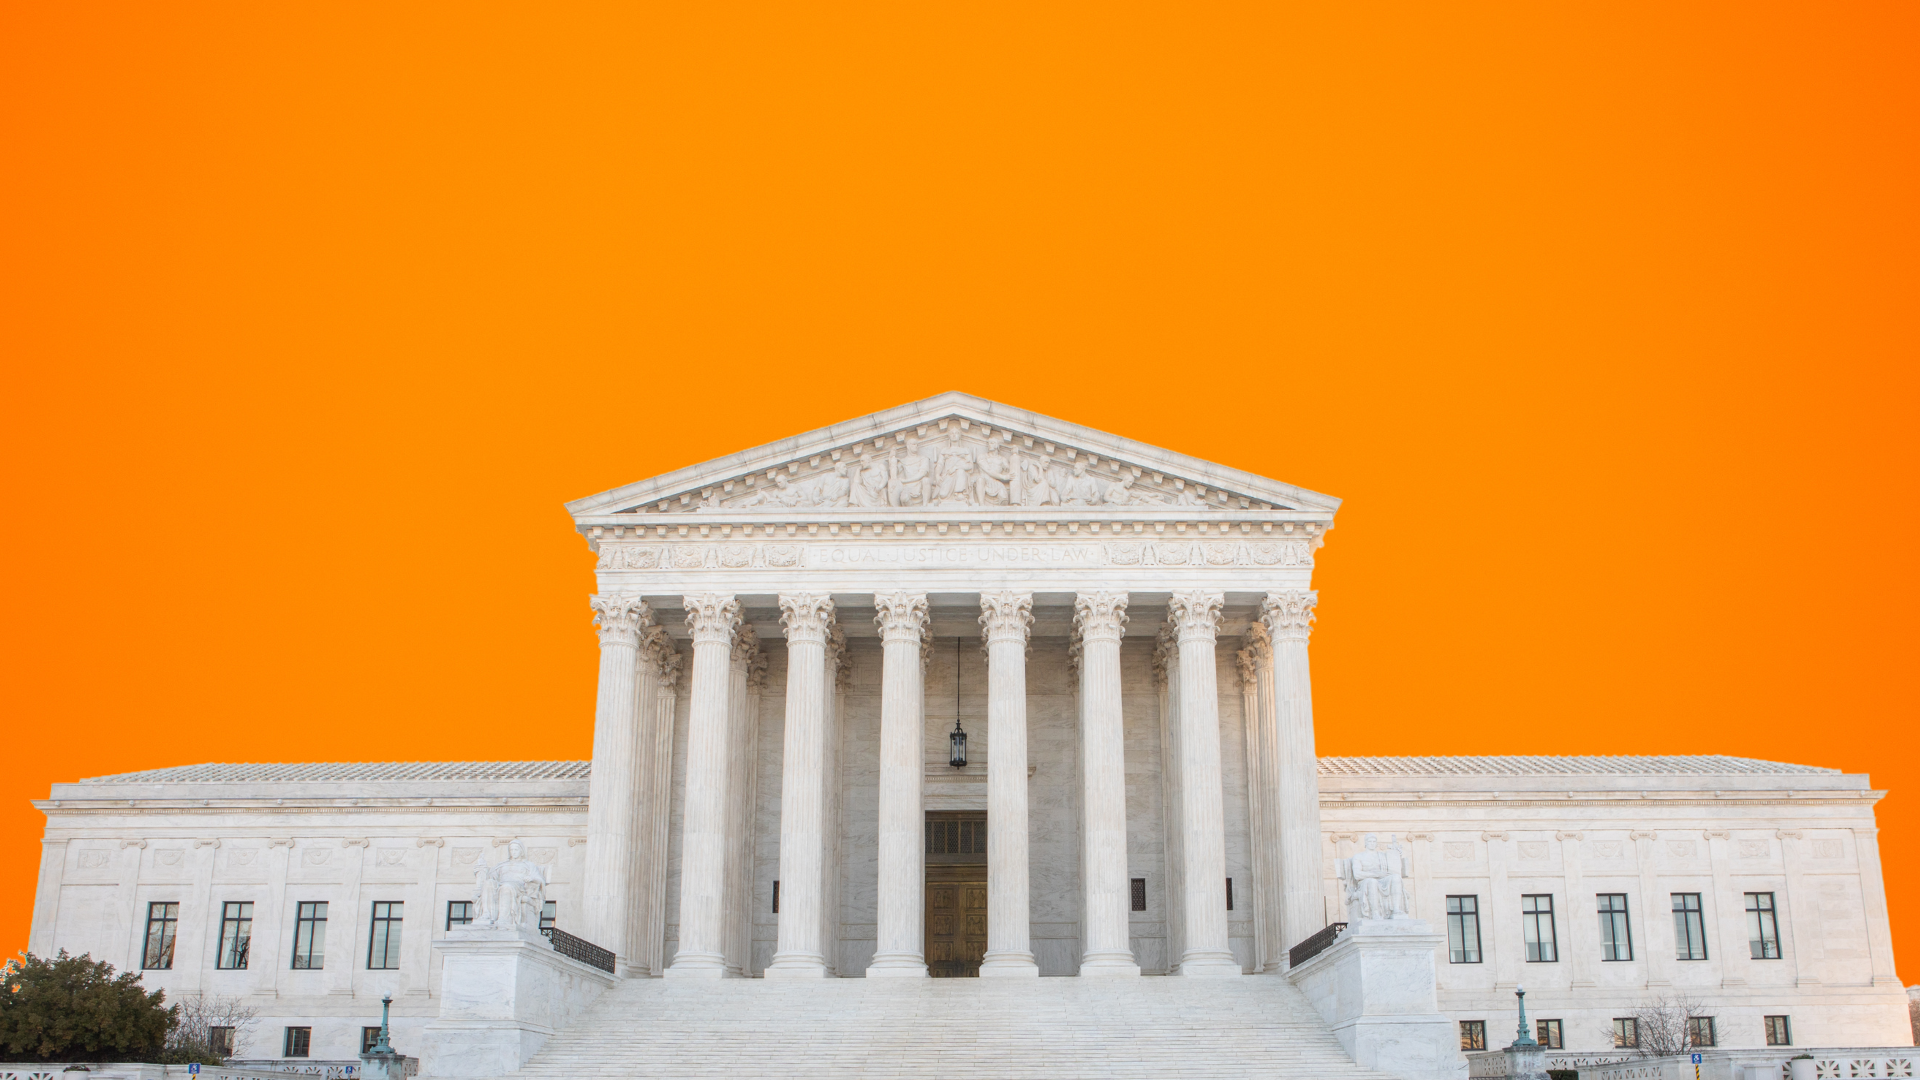 Image of the Supreme Court with an orange emergency background